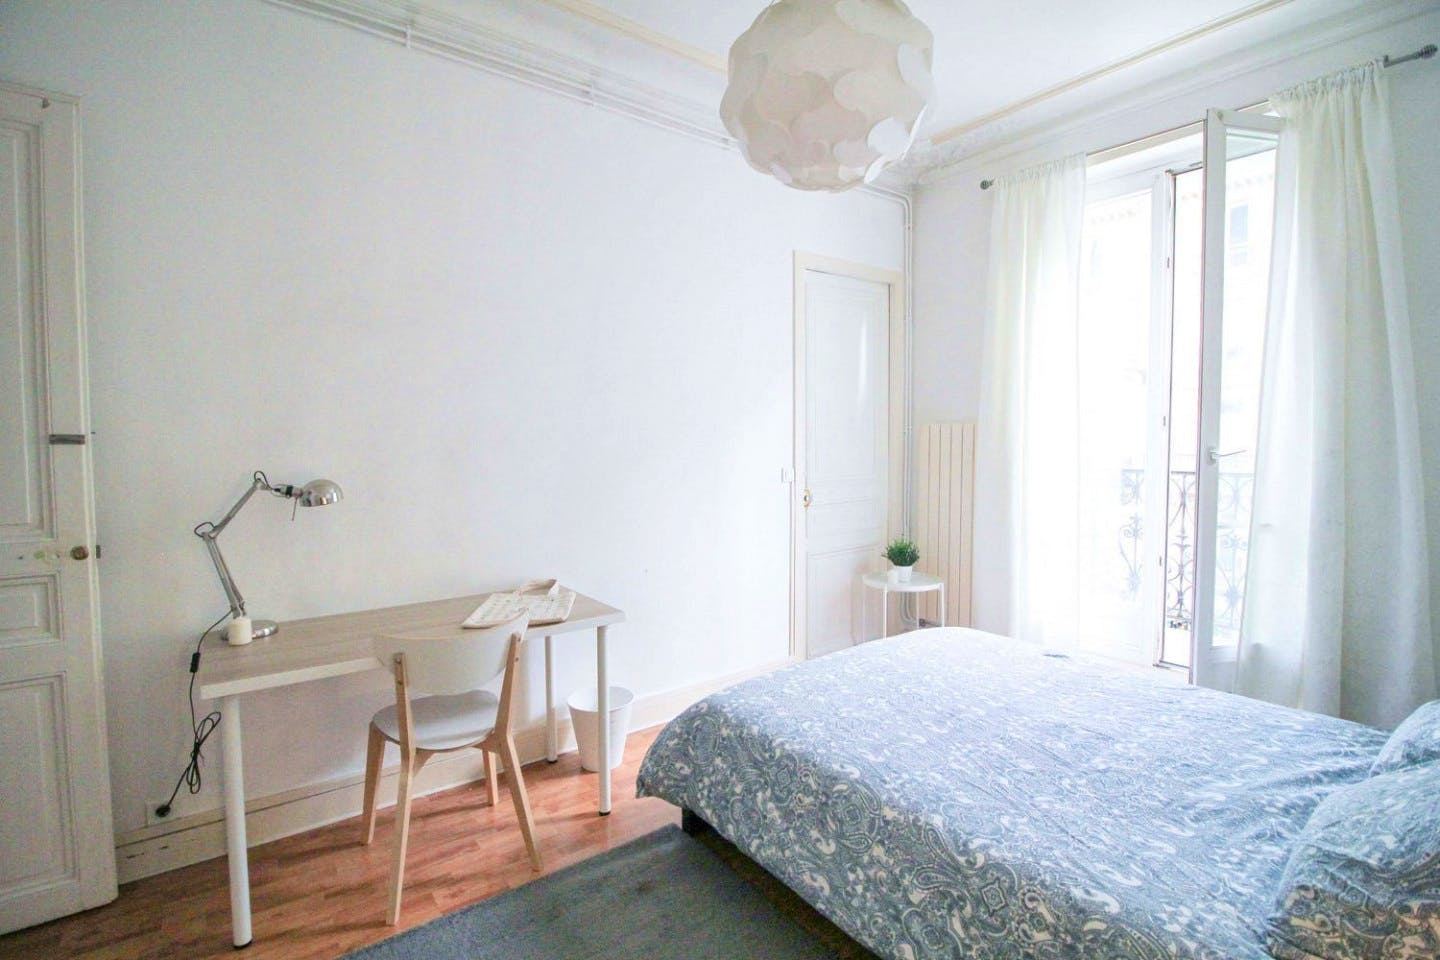 Superb apartment with a magnificent view of Montmartre